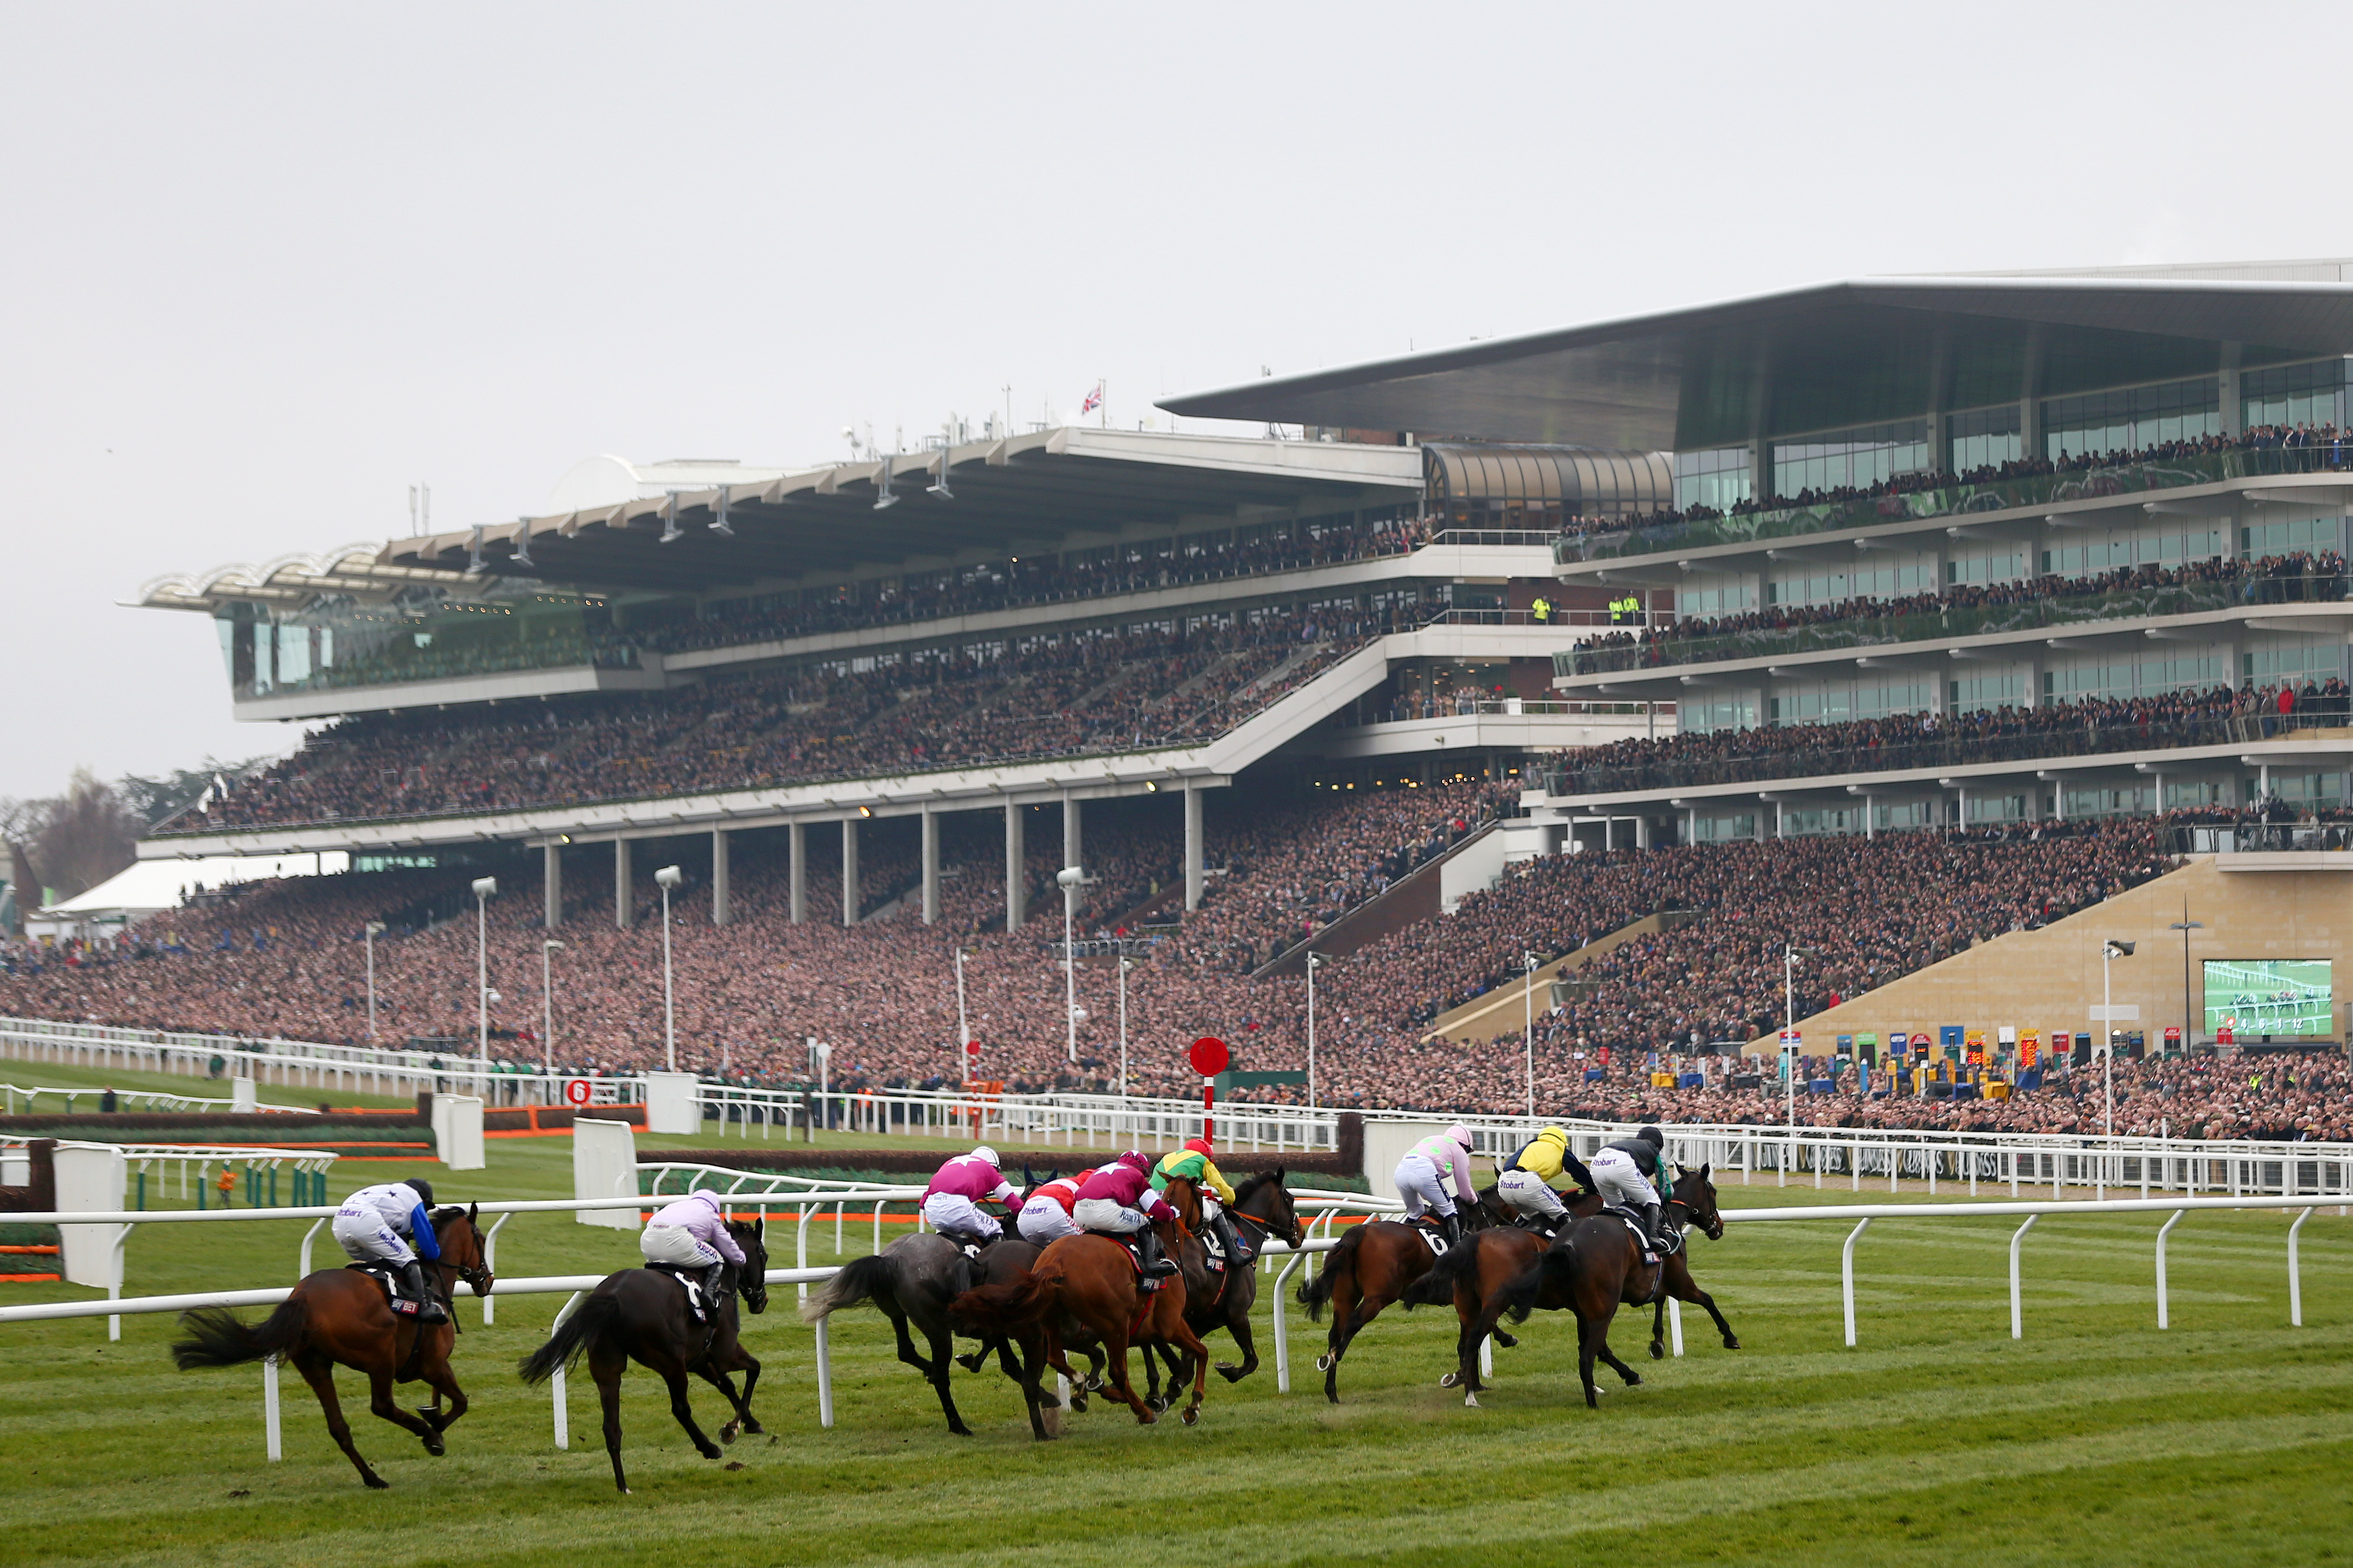 A group of horses racing at a sporting event